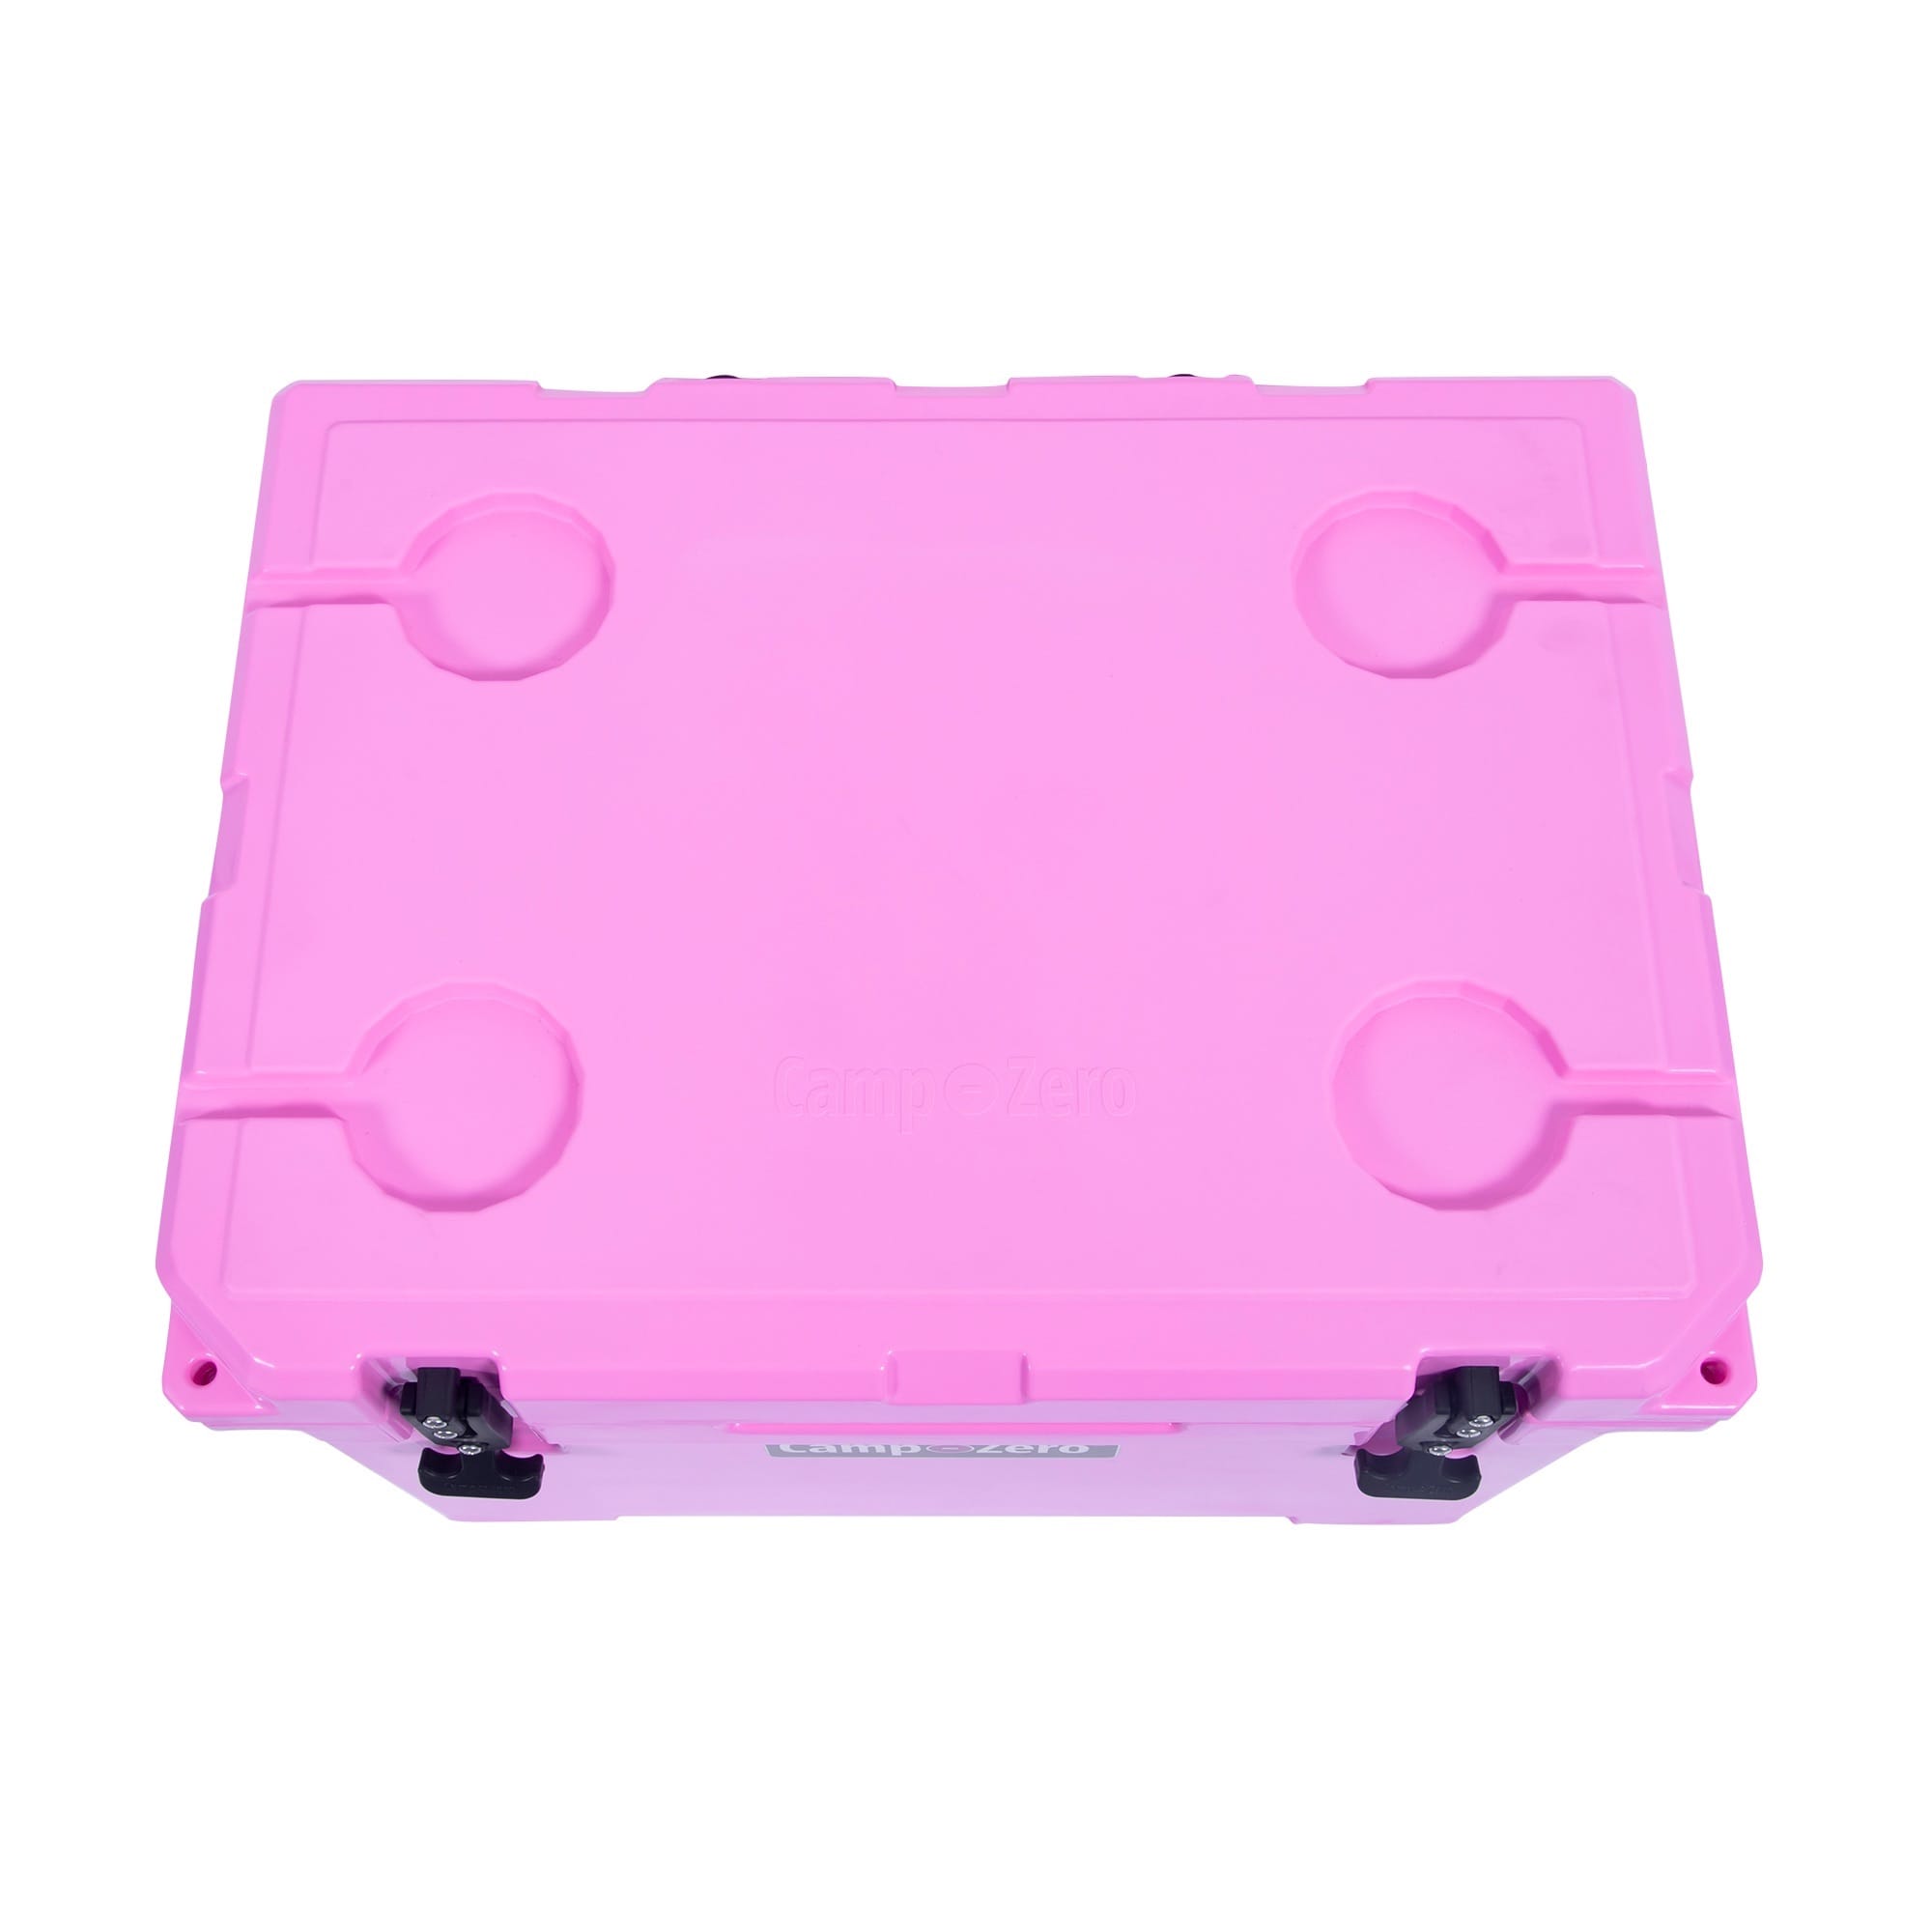 Camp-Zero Pink 42.2-Quart Insulated Chest Cooler in the Portable 